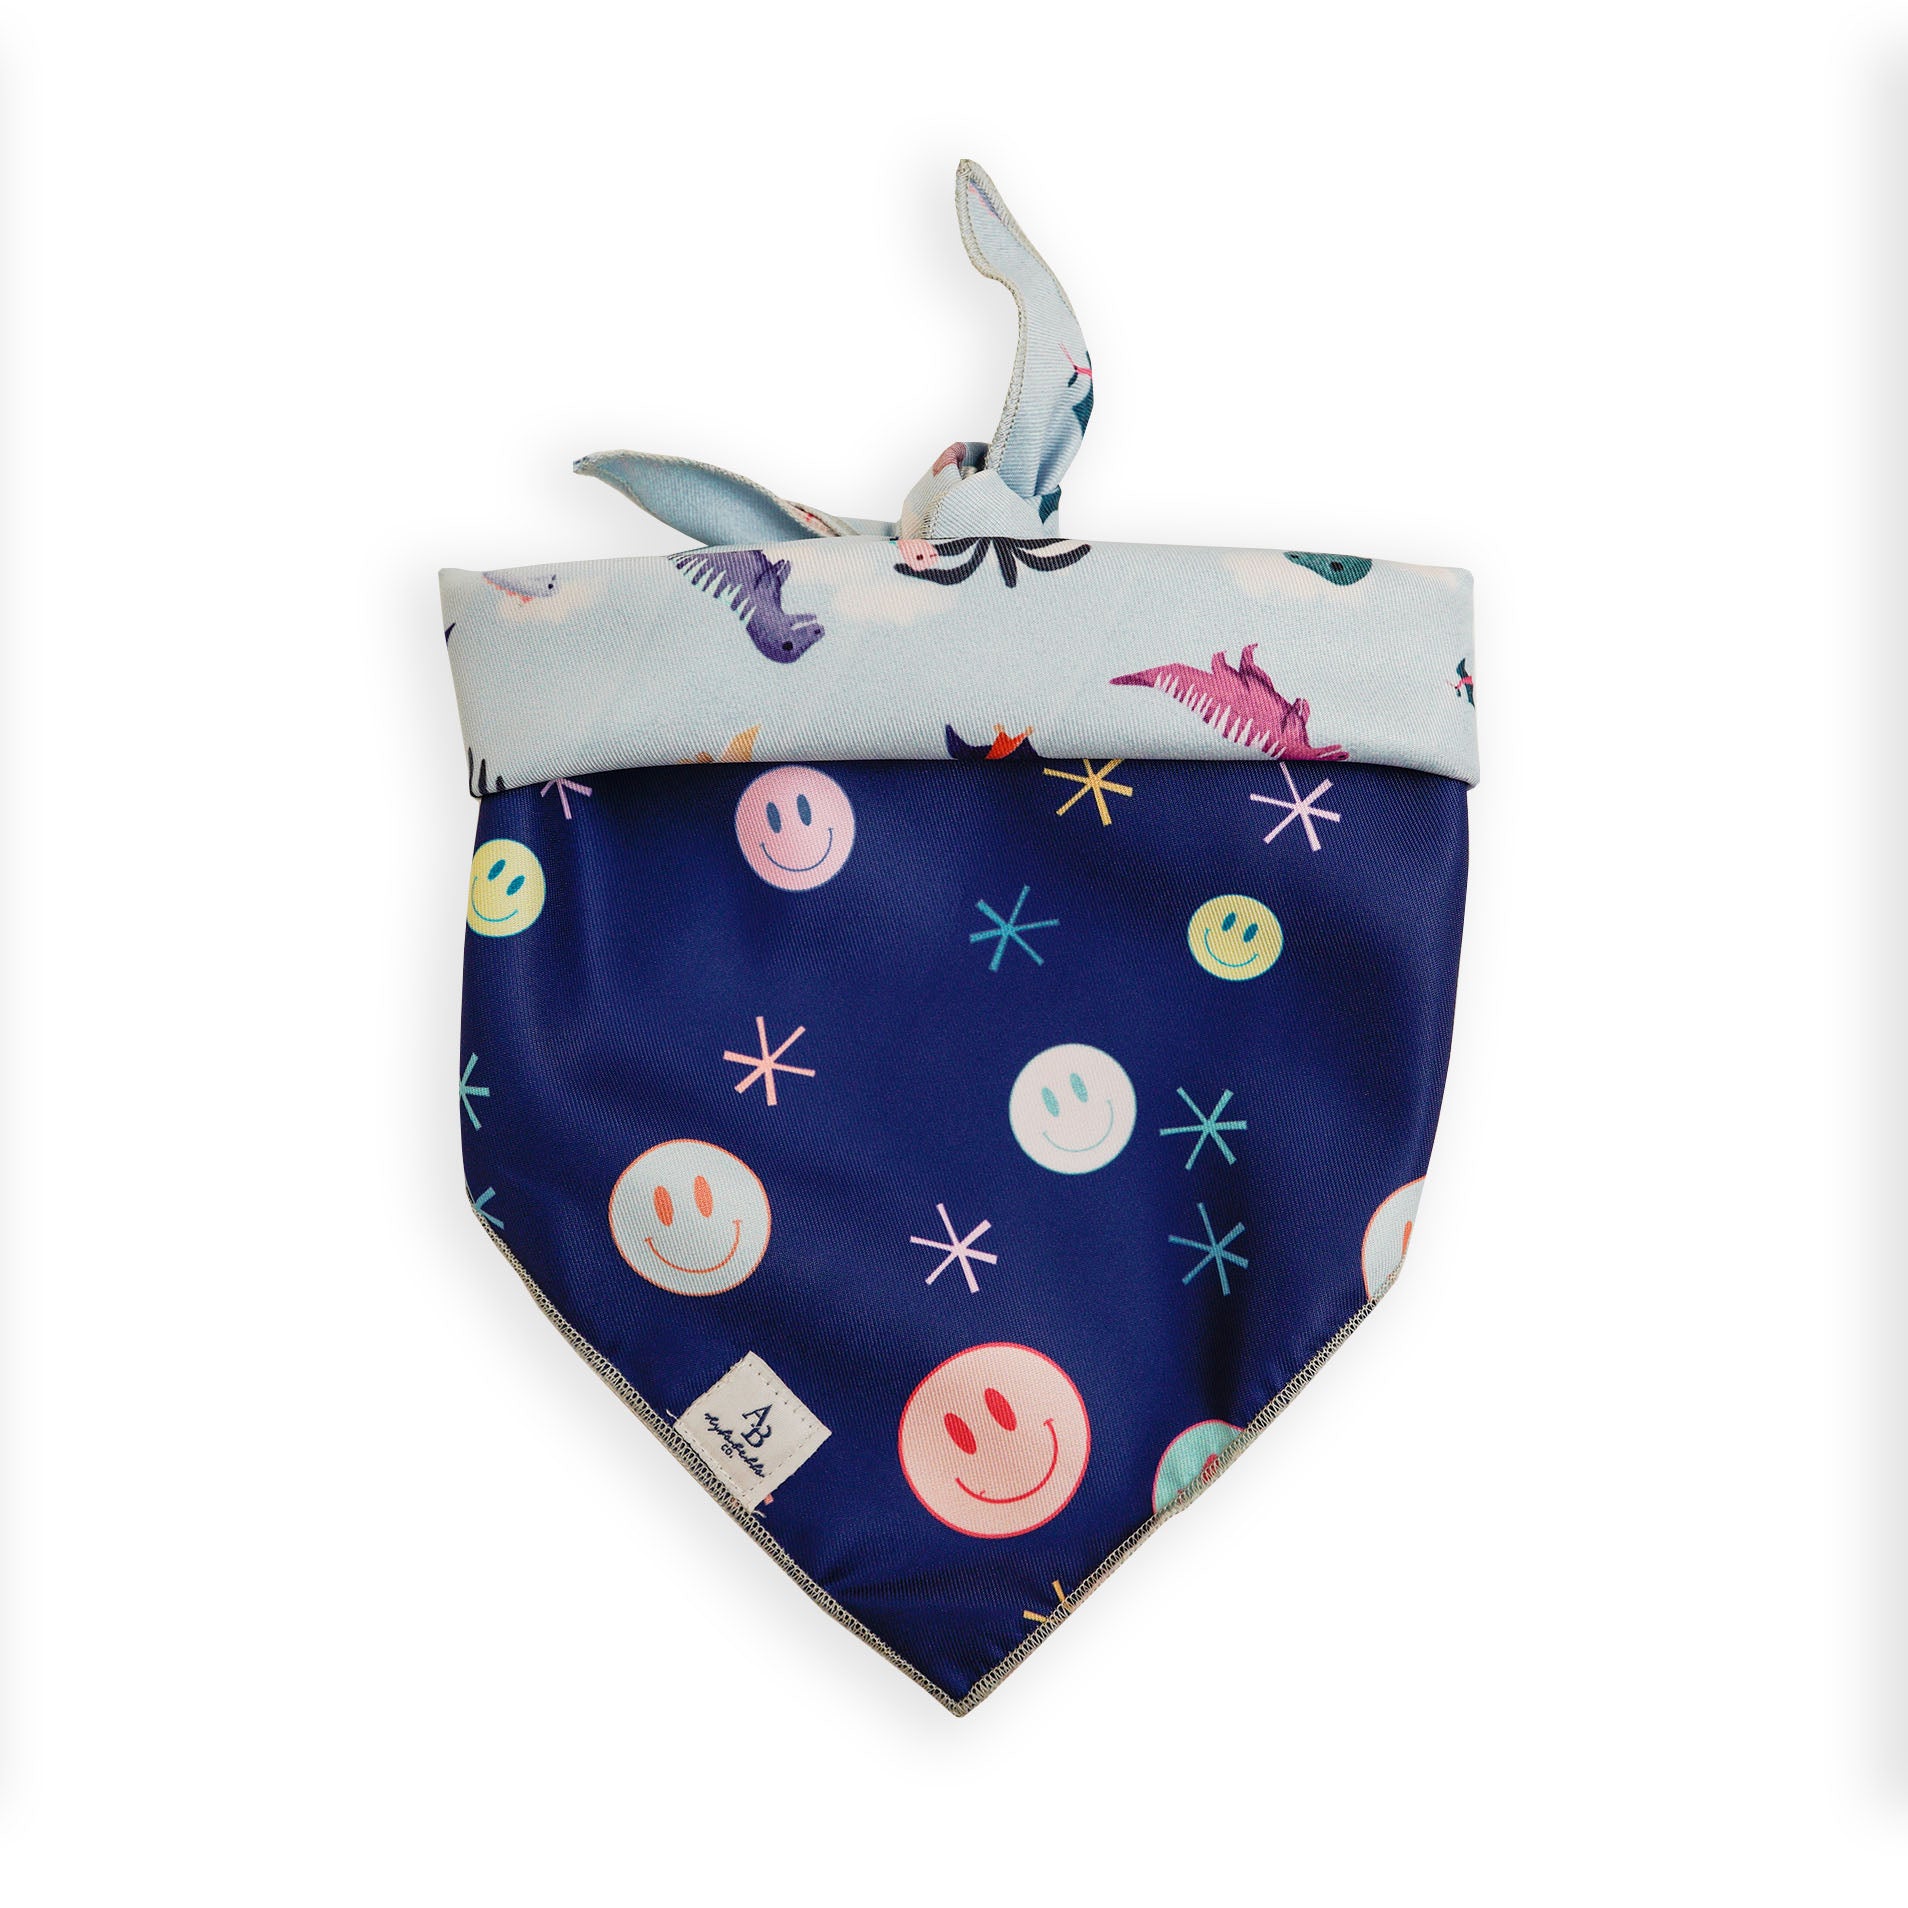 Aylabella Co. - Dino & Happy Reversible Bandana With Snaps for Dogs (3 Sizes)